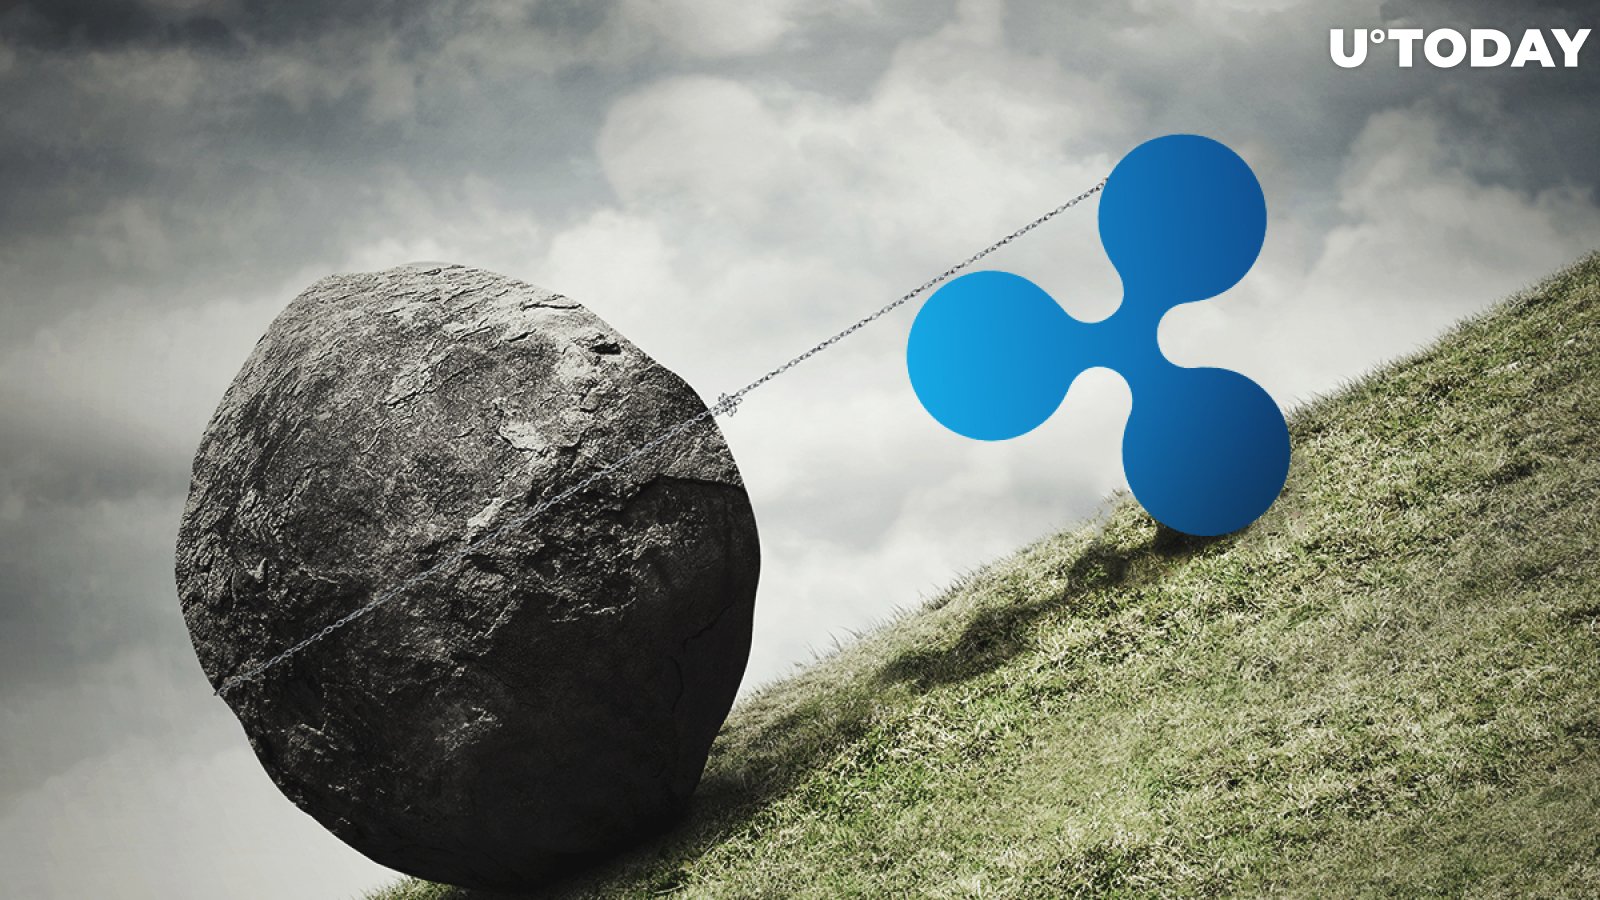 Ripple Is Still Liable for Illegal XRP Sales, According to Lead Plaintiff in Class-Action Lawsuit